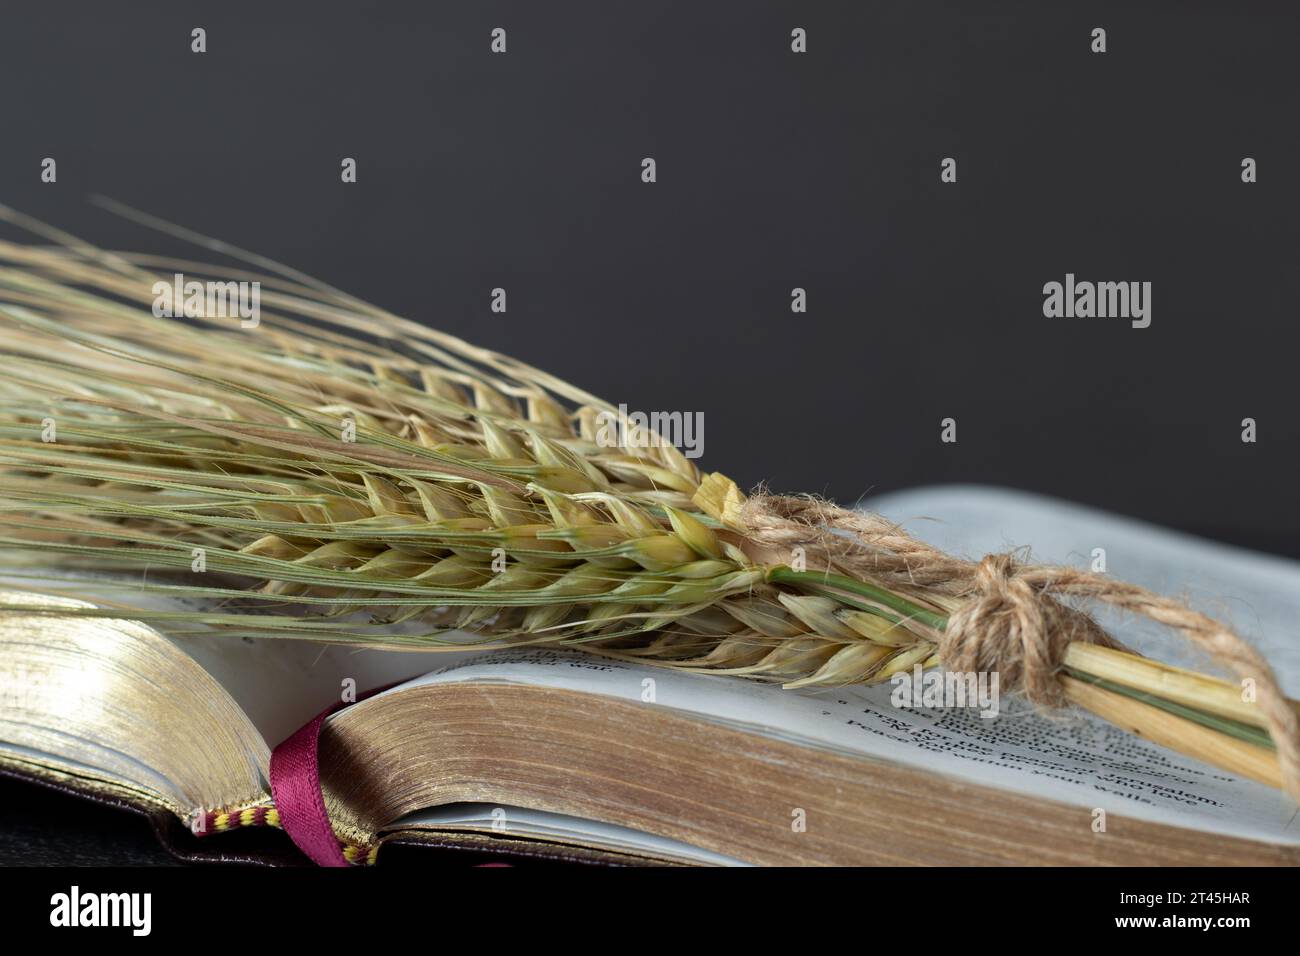 Stalk of barley on open holy bible book with dark background. Close-up. Spring harvest season offering, Christian spiritual firstfruits concept. Stock Photo